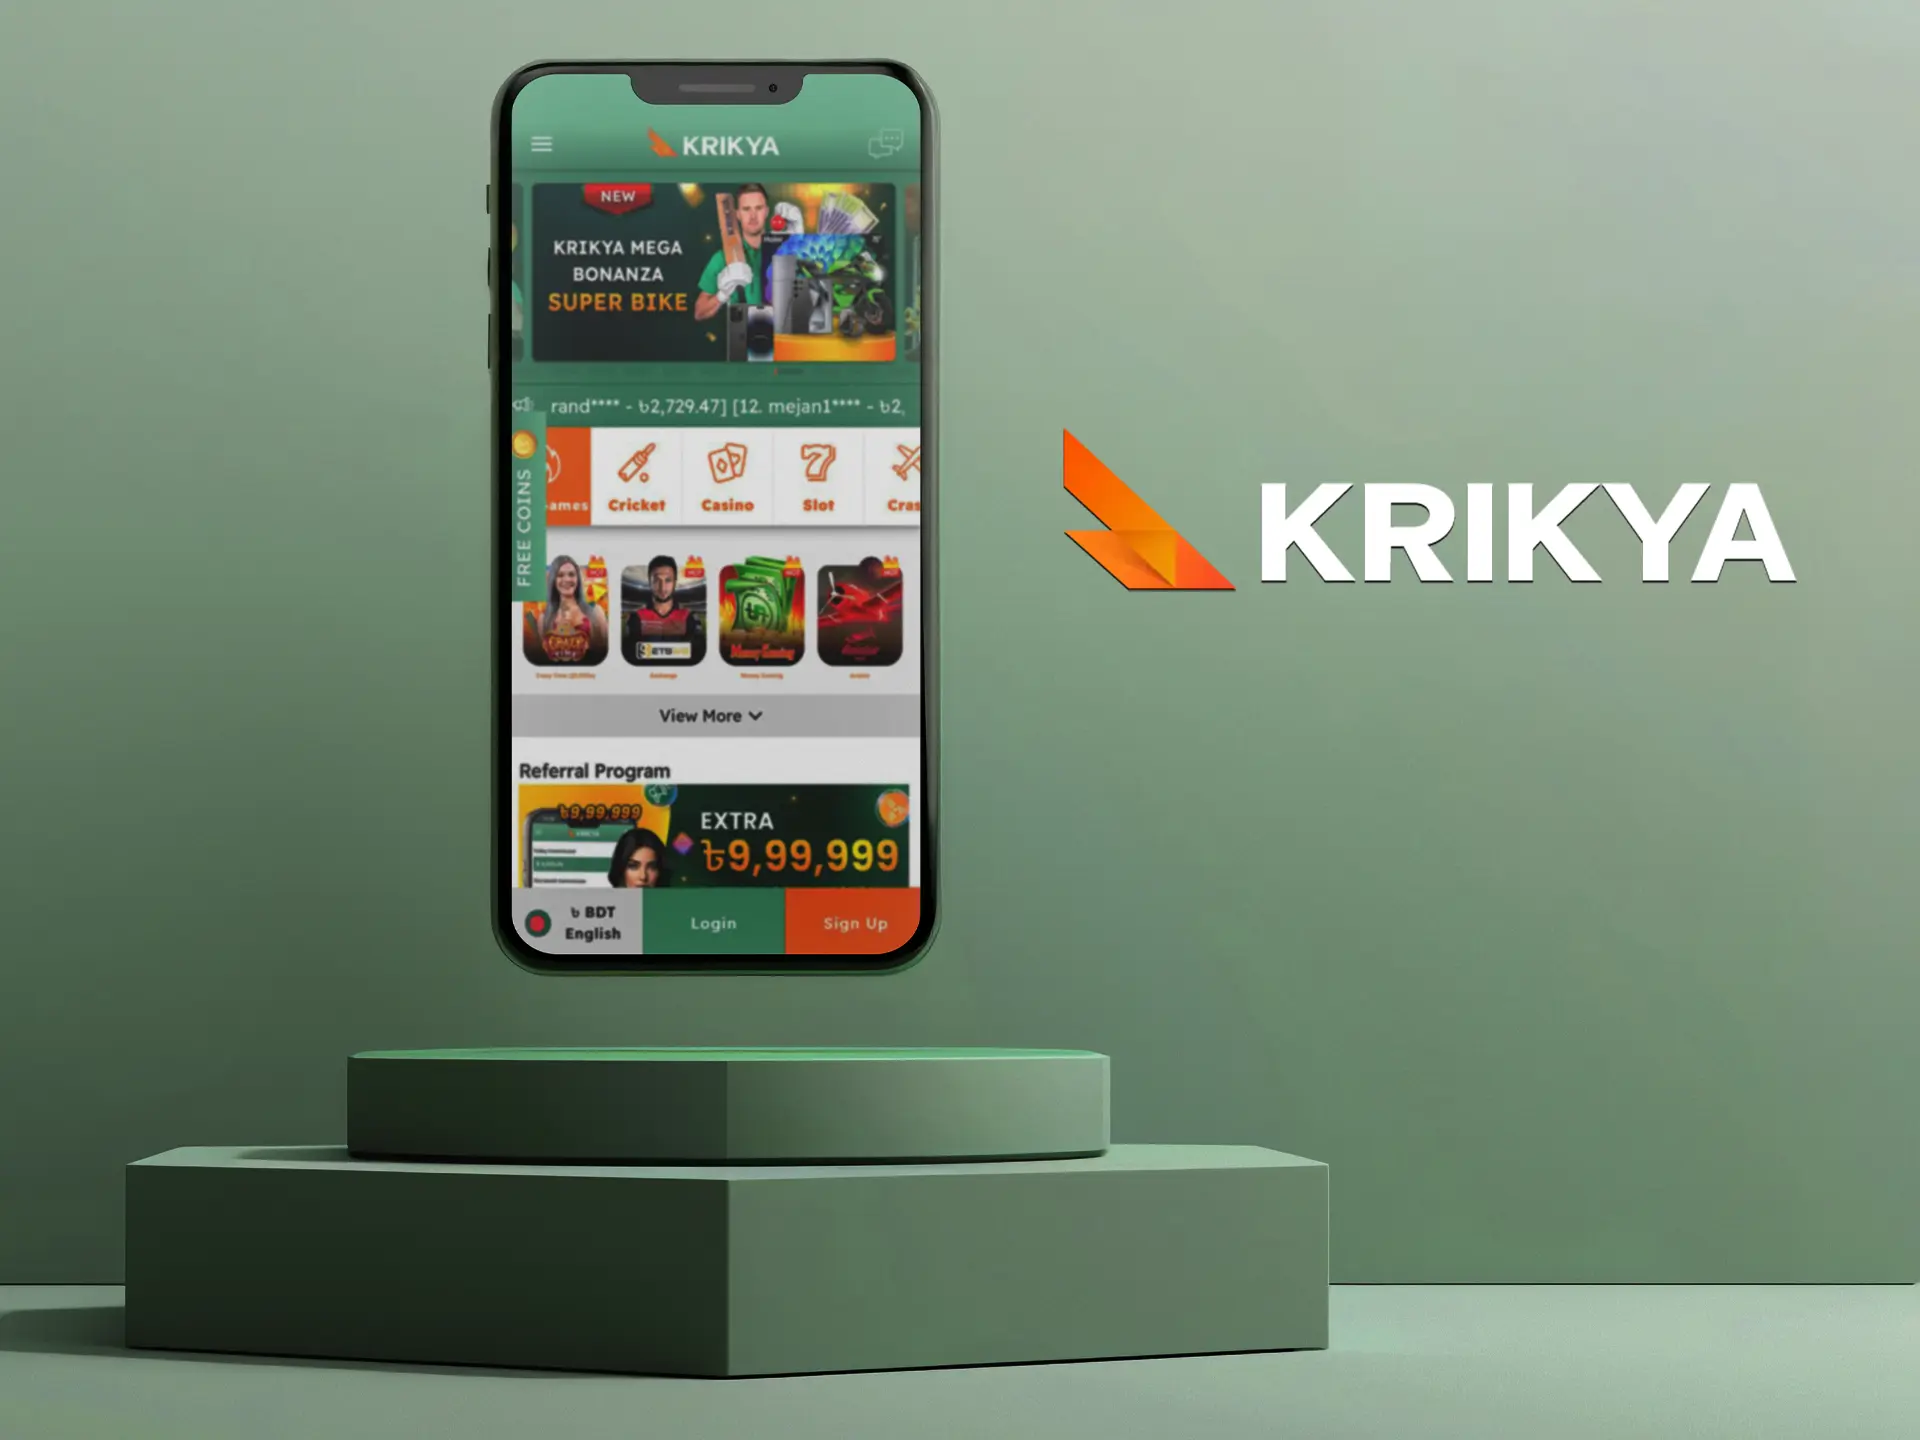 The Krikya app allows you to bet and play slots from anywhere.